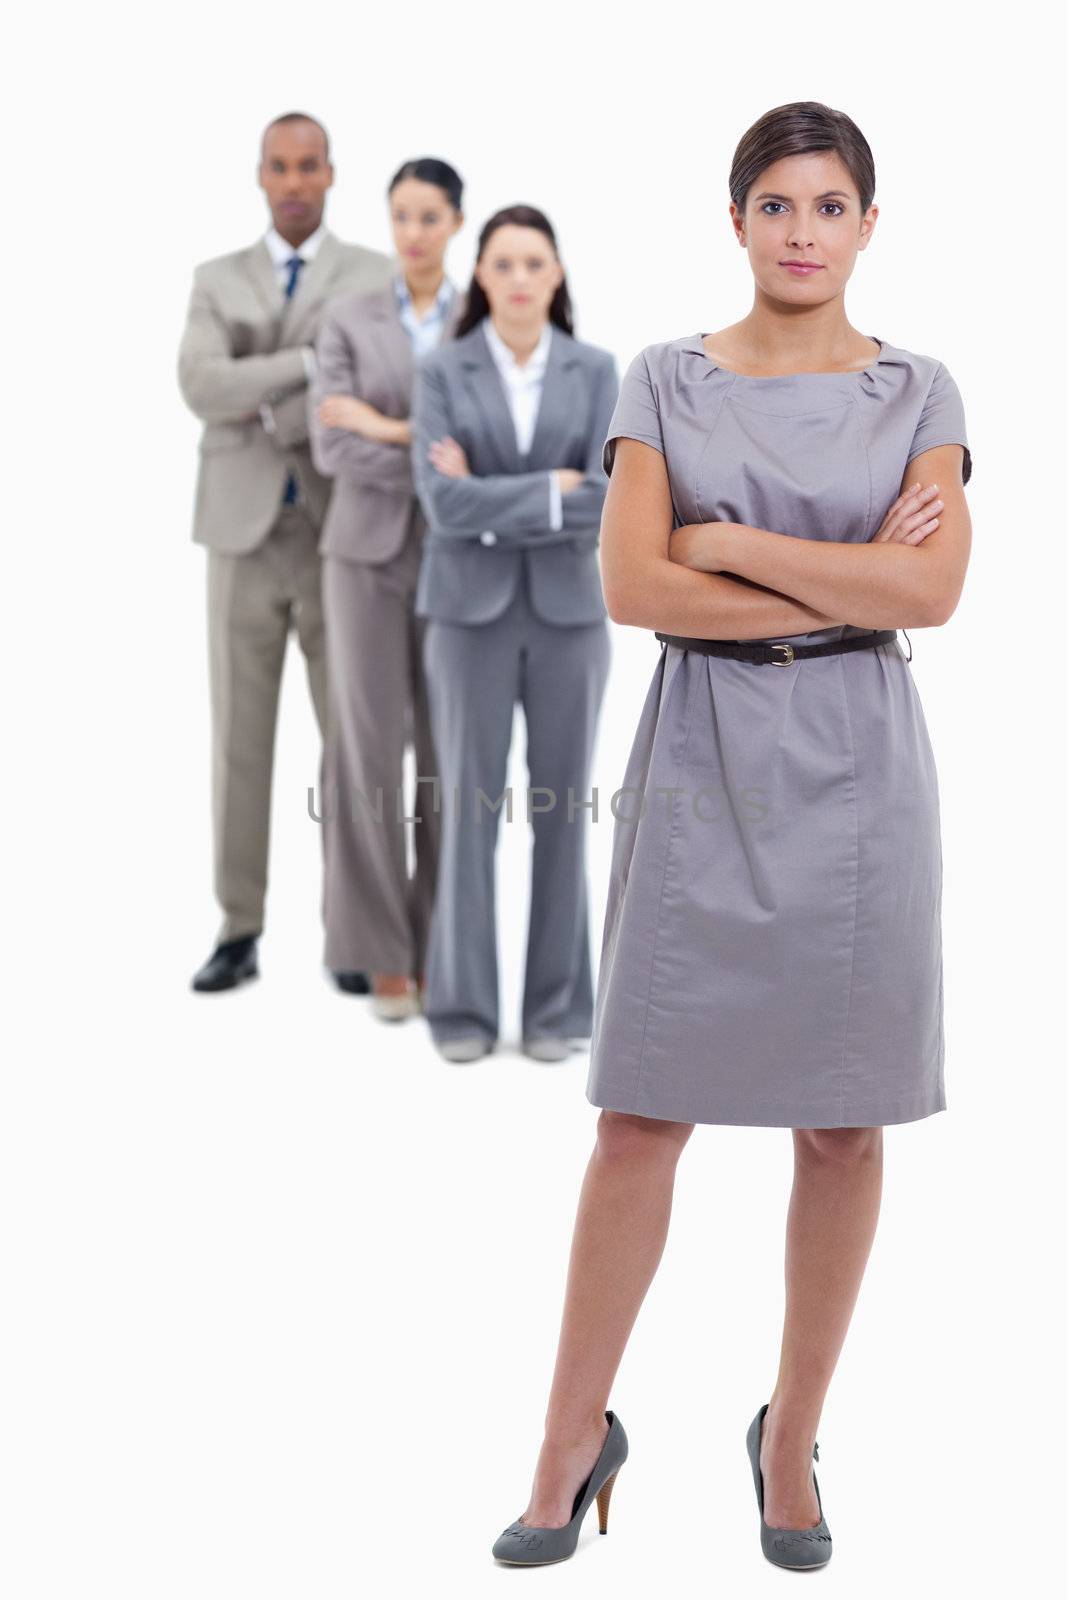 Businesswoman with a discrete smile and a team crossing their arms and standing behind each other against white background